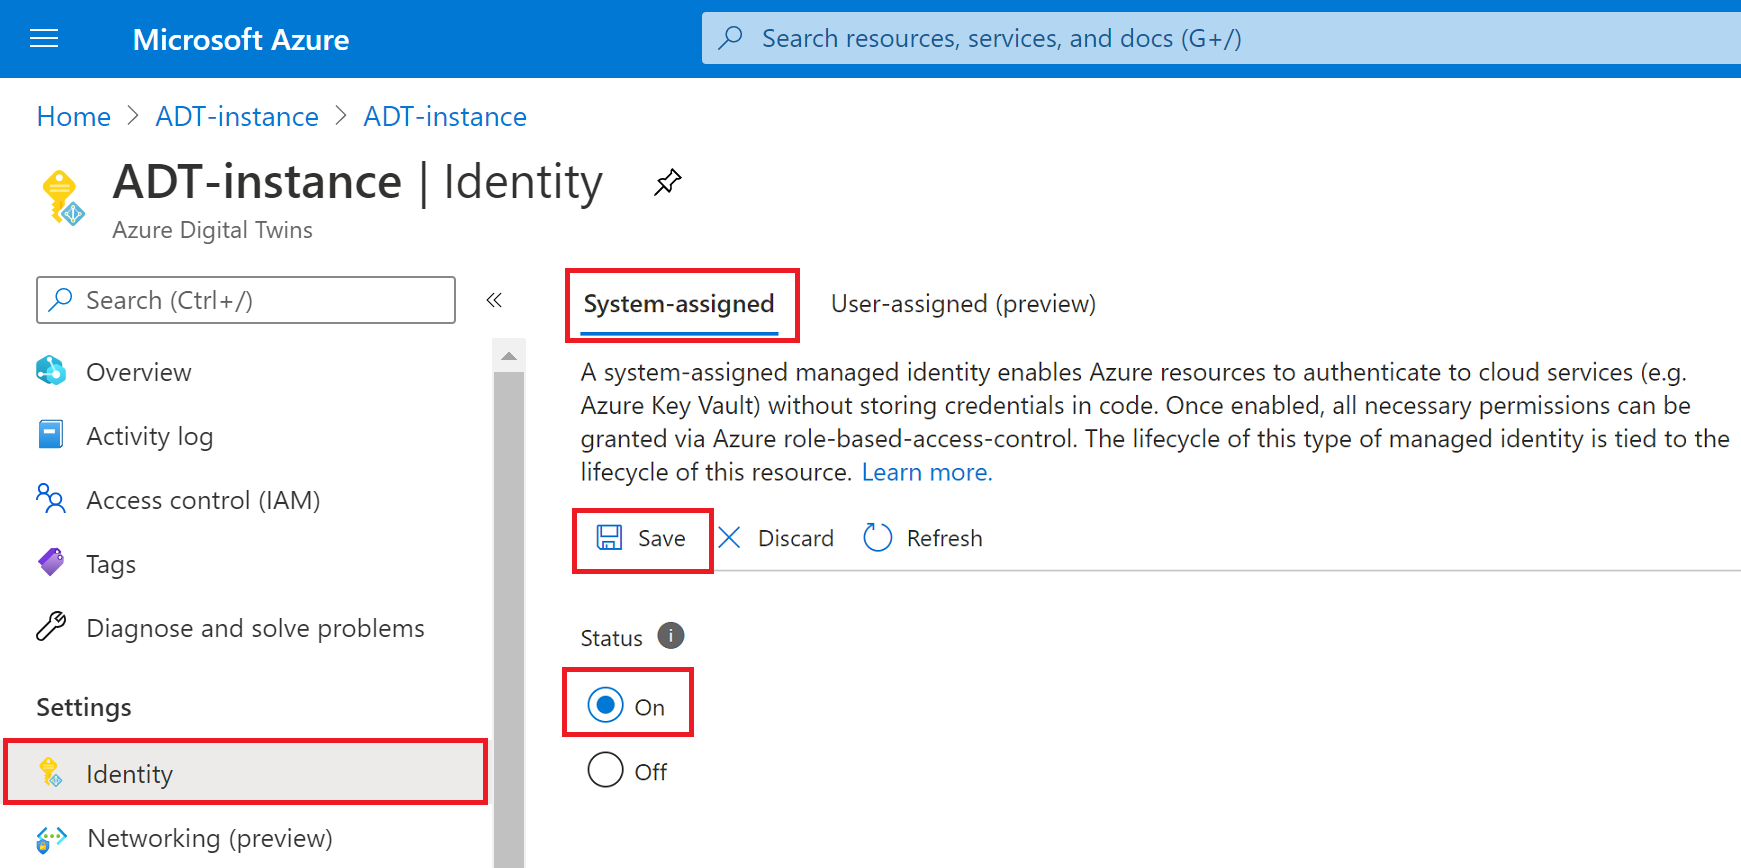 Screenshot of the Azure portal showing the Identity page and system-assigned options for an Azure Digital Twins instance.